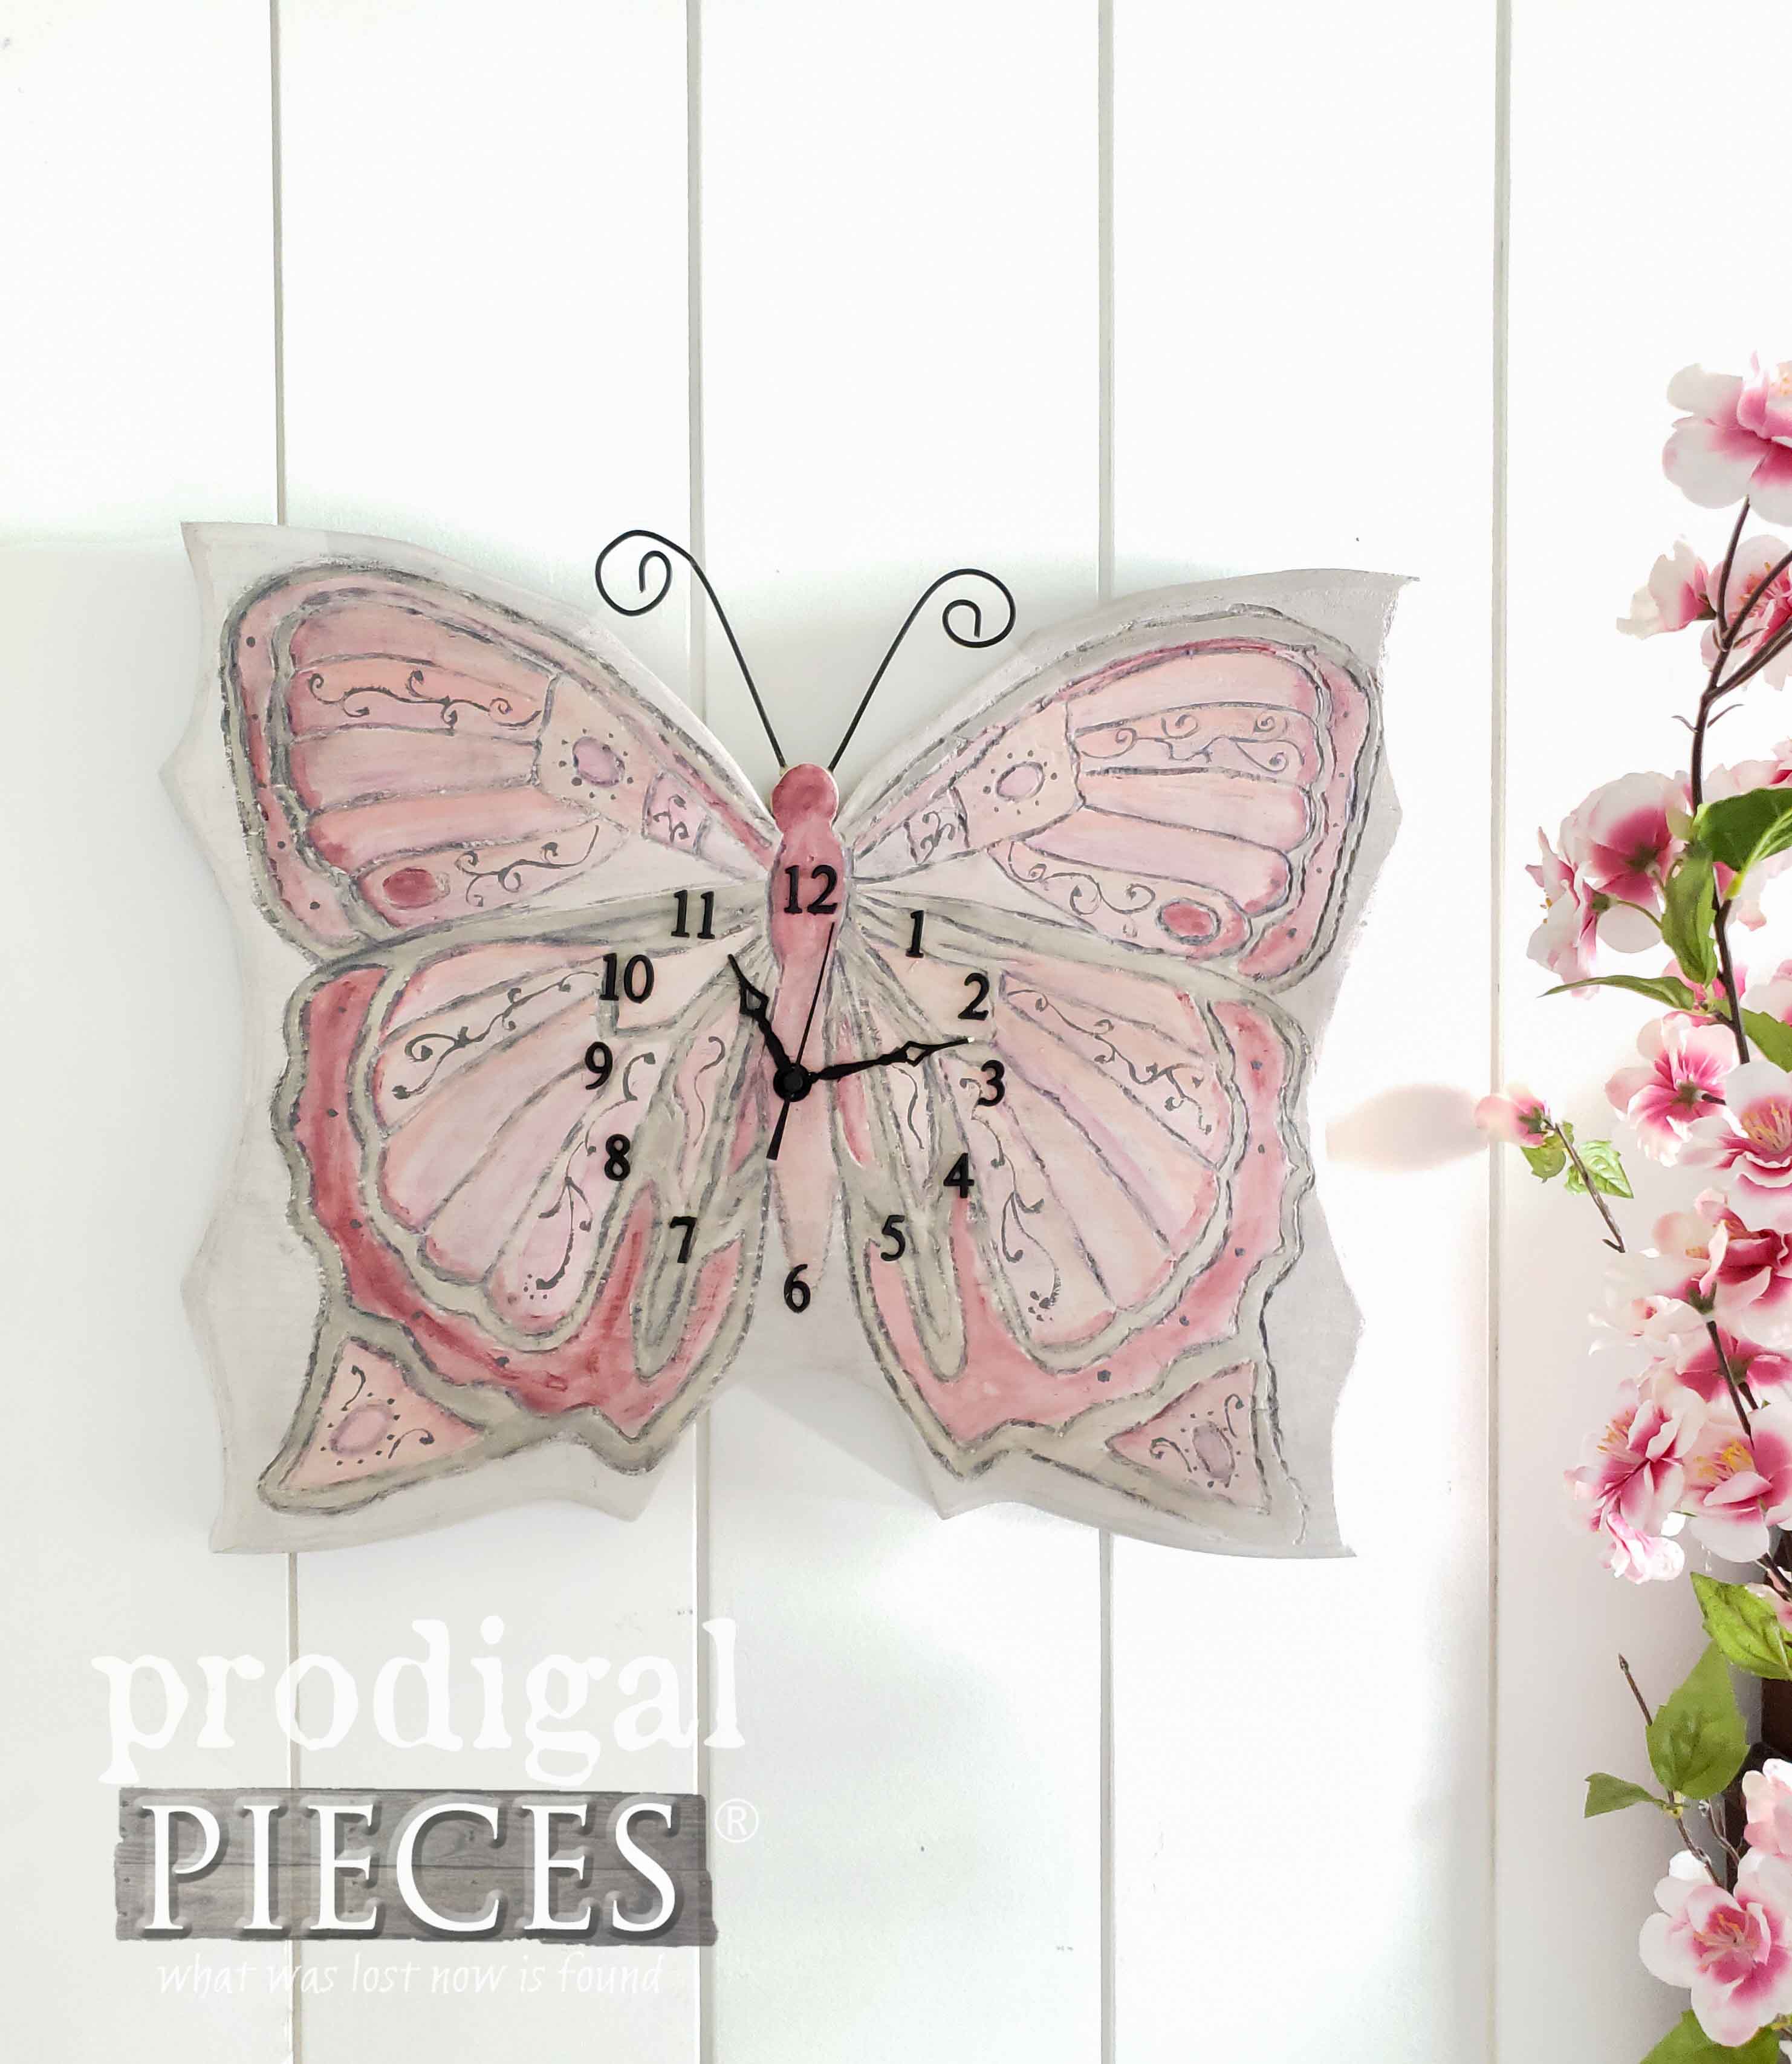 Upcycled Handmade Wall Clock made into Butterfly Wall Art by Larissa of Prodigal Pieces | prodigalpieces.com